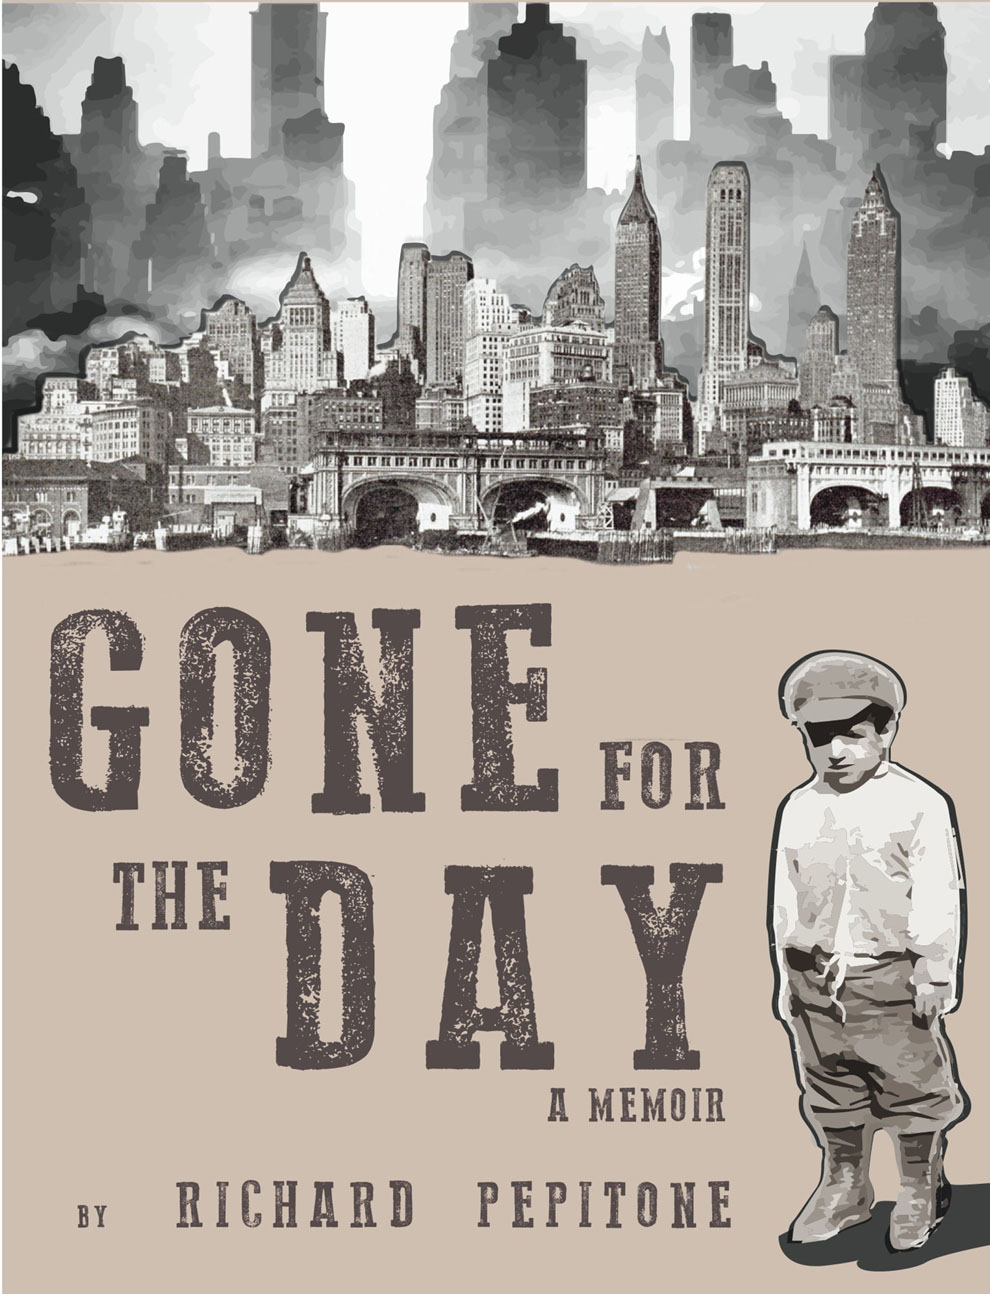 Gone For The Day: A Memoir by Richard Pepitone